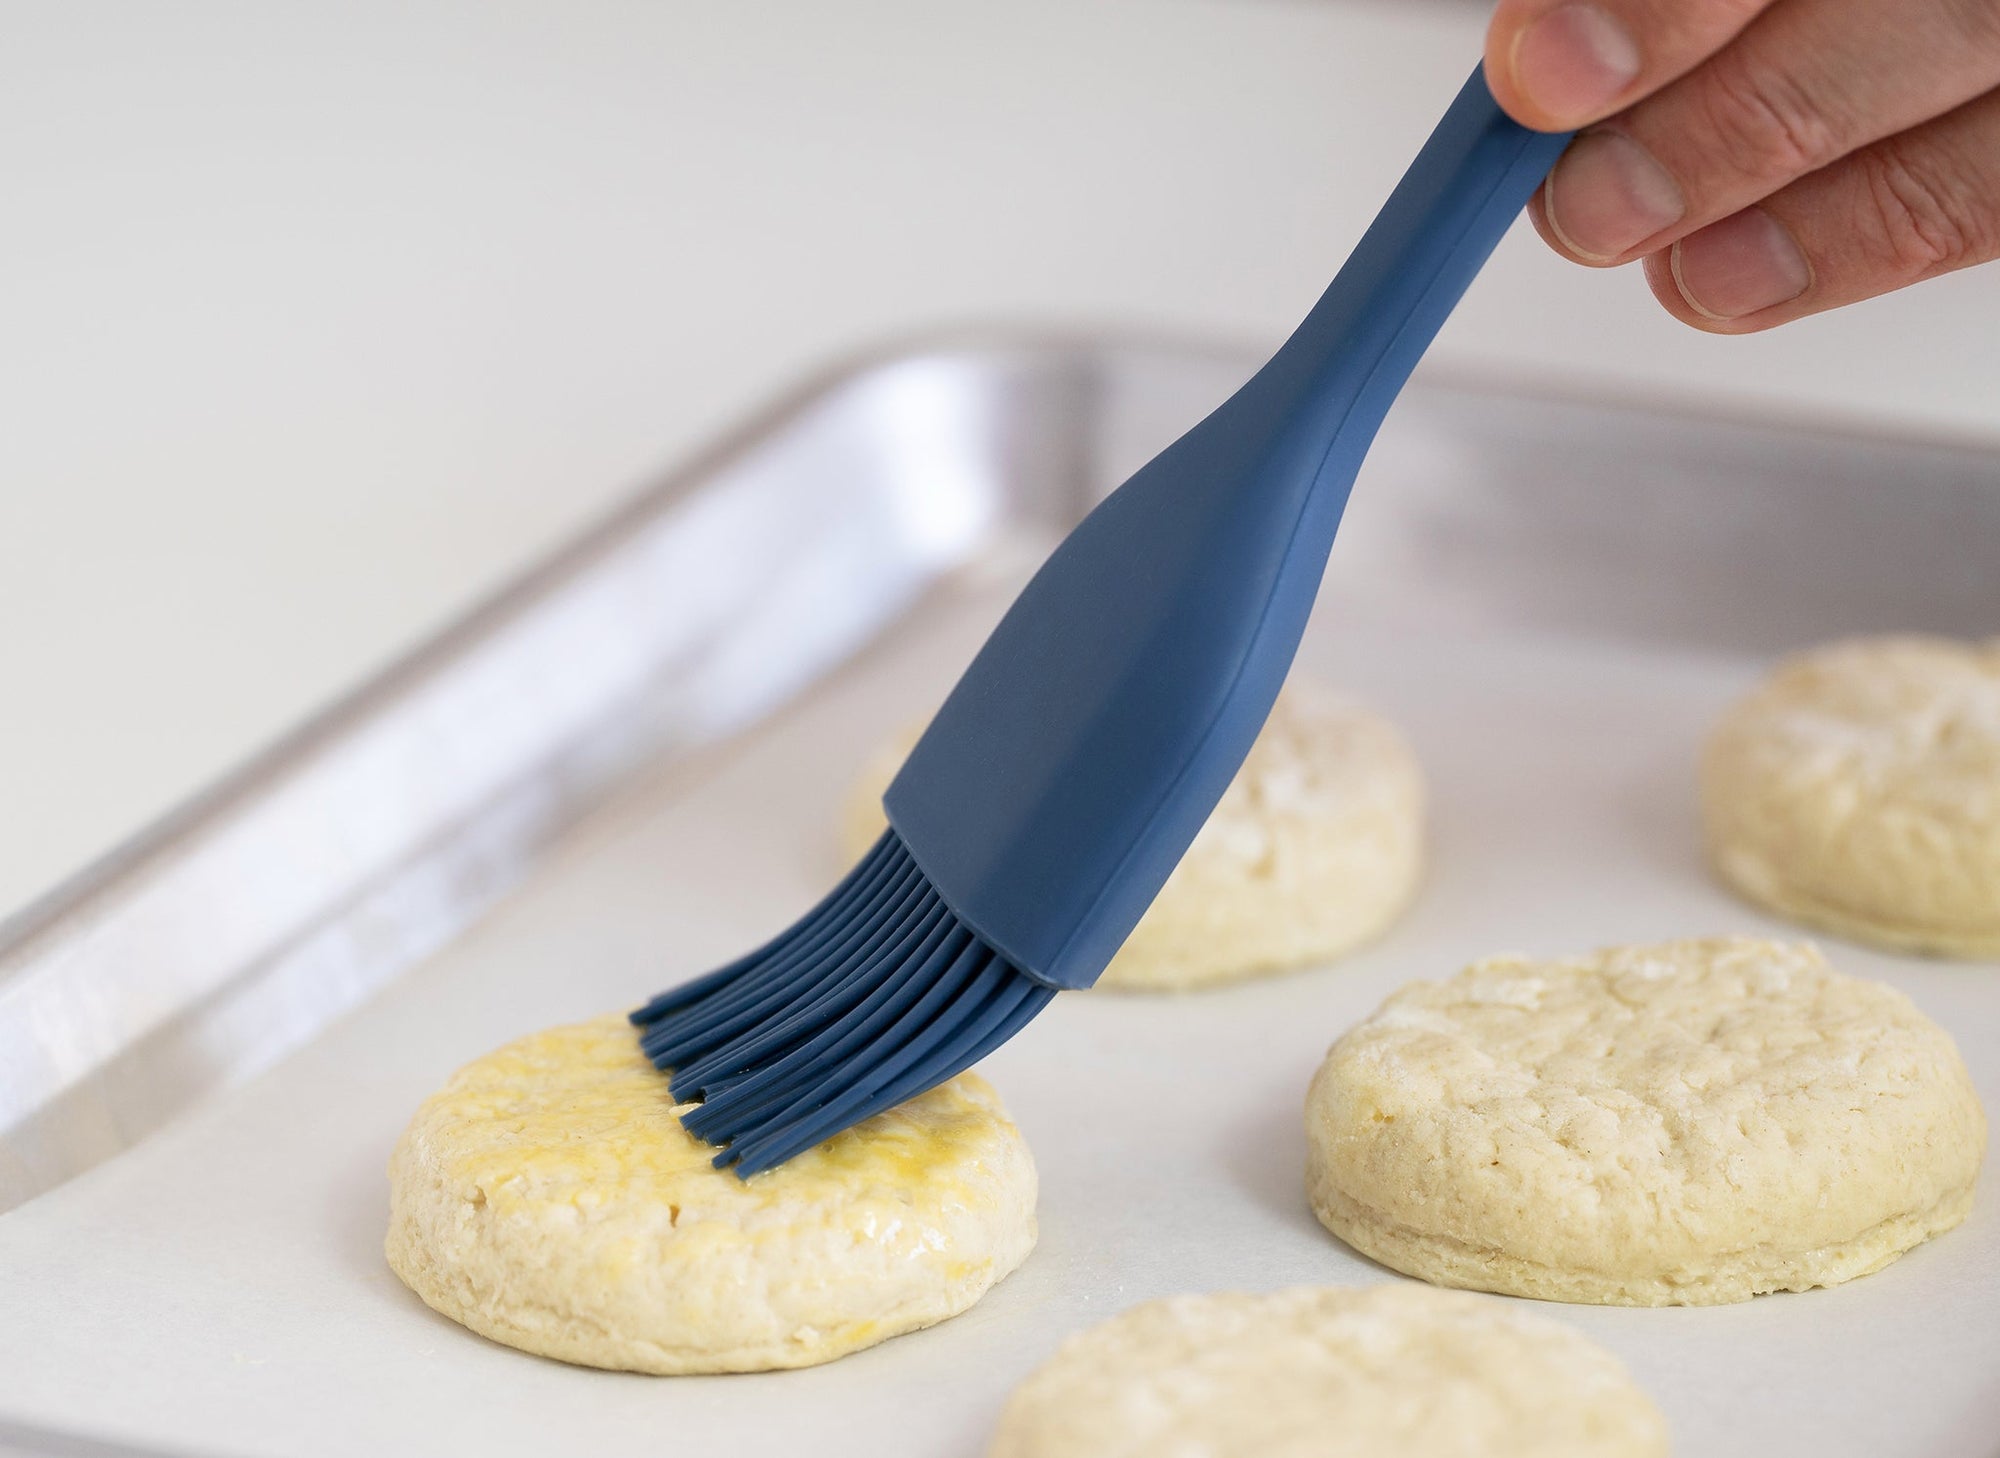 {{blue,black,gray}} Blue Misen Pastry Brush spreading melted butter on biscuits in a baking sheet lined with white paper.